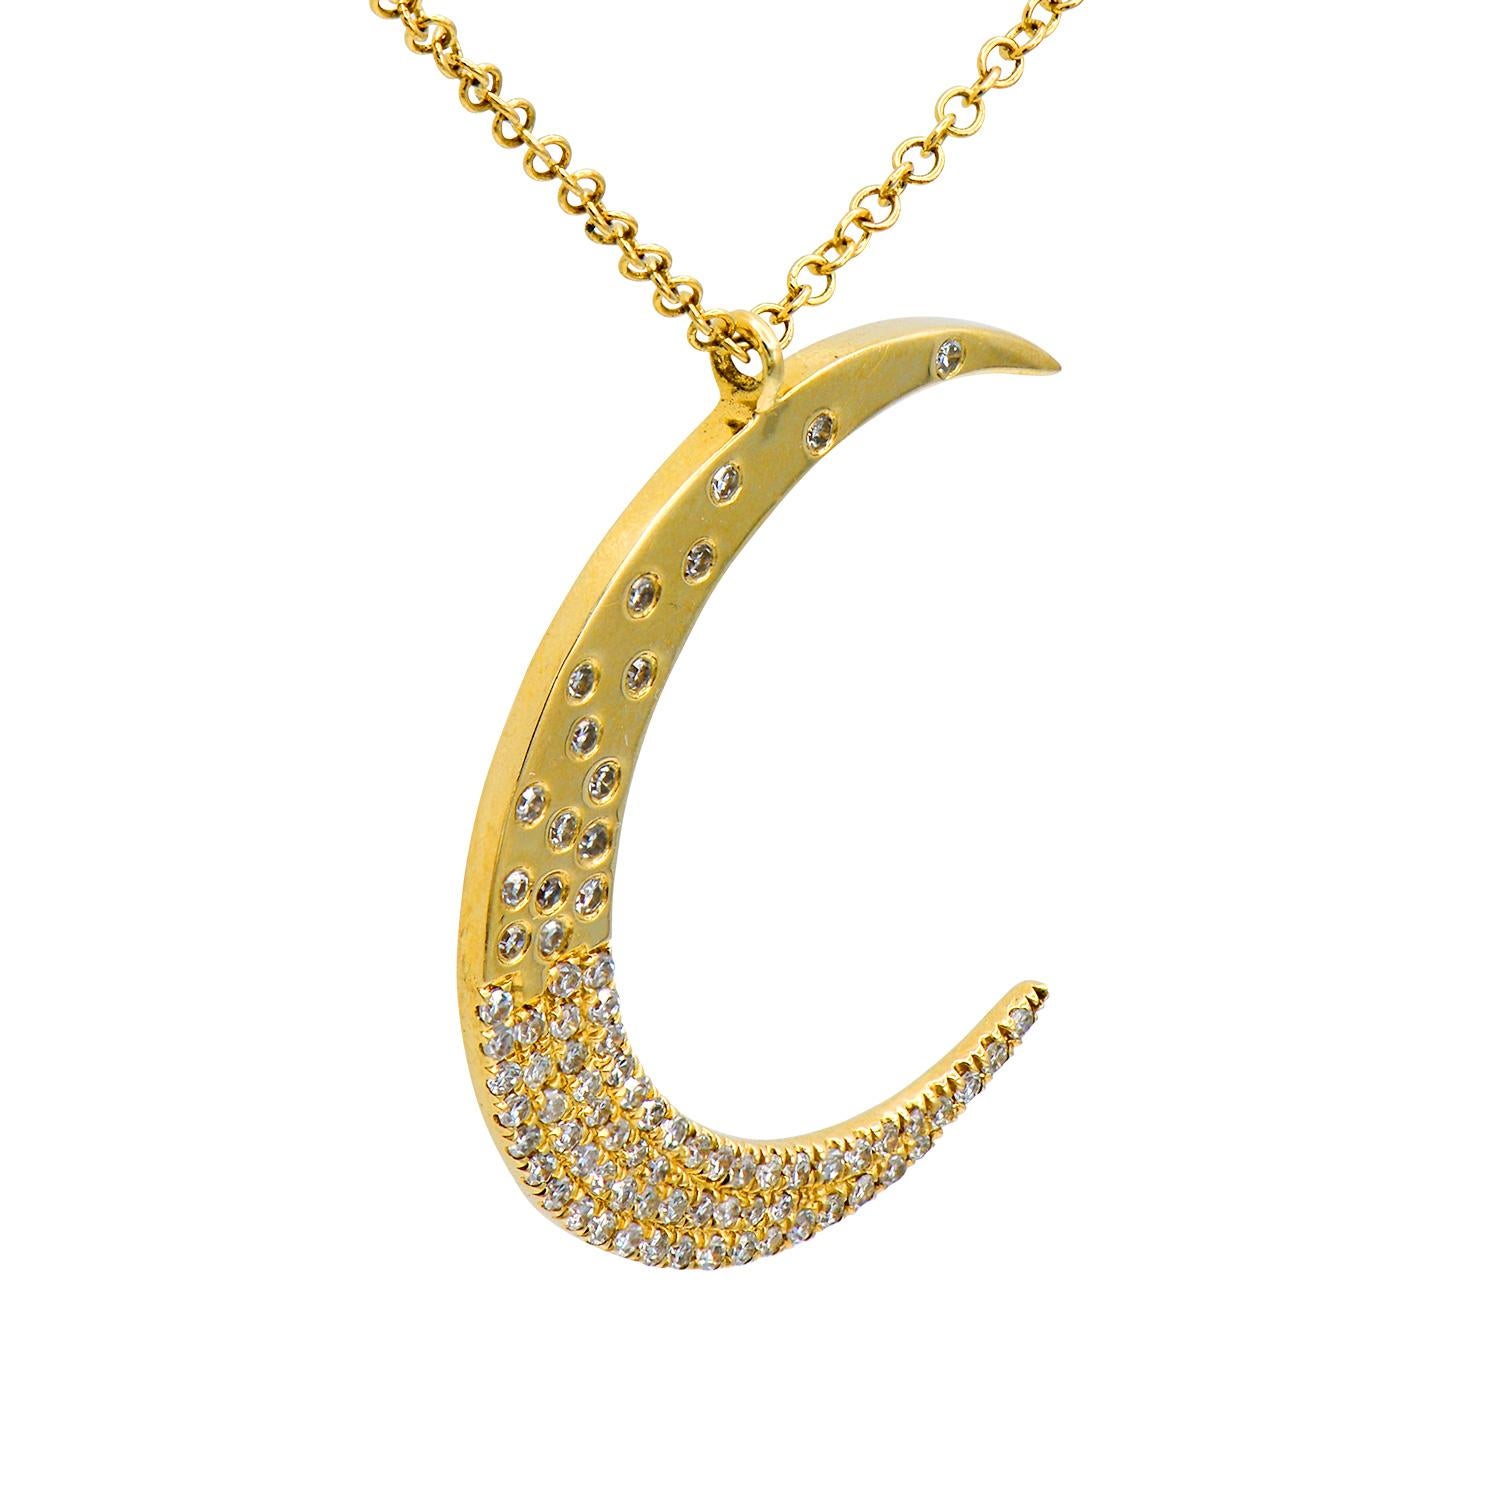 This fun moon necklace is made of 18 karat yellow gold totaling 1.8 grams. The moon is adorned with 78 round VS quality GH Color beautiful diamonds that total 0.23 carats. The diamonds are scattered on the top half of the moon and more full towards